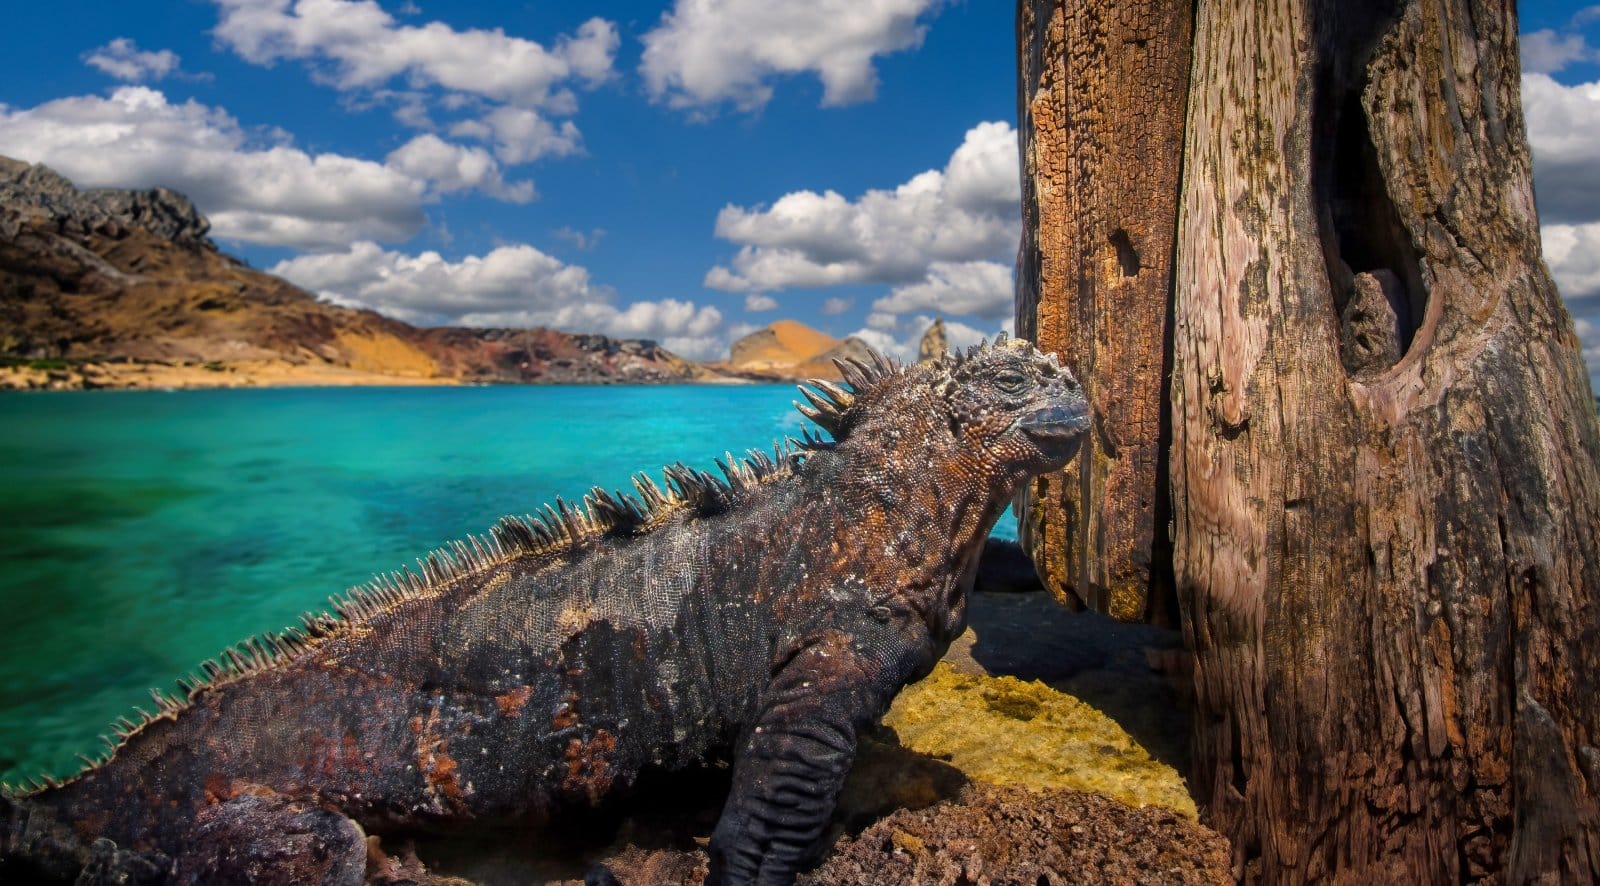 <p><span>The Galápagos Islands, an archipelago of volcanic islands straddling the equator in the Pacific Ocean, are a living museum of evolutionary biology. This UNESCO World Heritage site is home to an array of unique wildlife species, many of which are found nowhere else on Earth. </span></p> <p><span>The islands offer an unparalleled opportunity to observe and study wildlife in an environment relatively untouched by human influence. From giant tortoises and marine iguanas to blue-footed boobies and Darwin’s finches, the Galápagos Islands provide a unique window into the natural world.</span></p> <p><b>Insider’s Tip: </b><span>Snorkeling with playful sea lions is a must-do experience in the Galápagos.</span></p> <p><b>When To Travel: </b><span>Visit from December to May for warmer weather and calmer seas, ideal for snorkeling and diving.</span></p> <p><b>How To Get There: </b><span>Fly to Quito or Guayaquil in Ecuador, followed by a flight to one of the islands’ airports.</span></p>